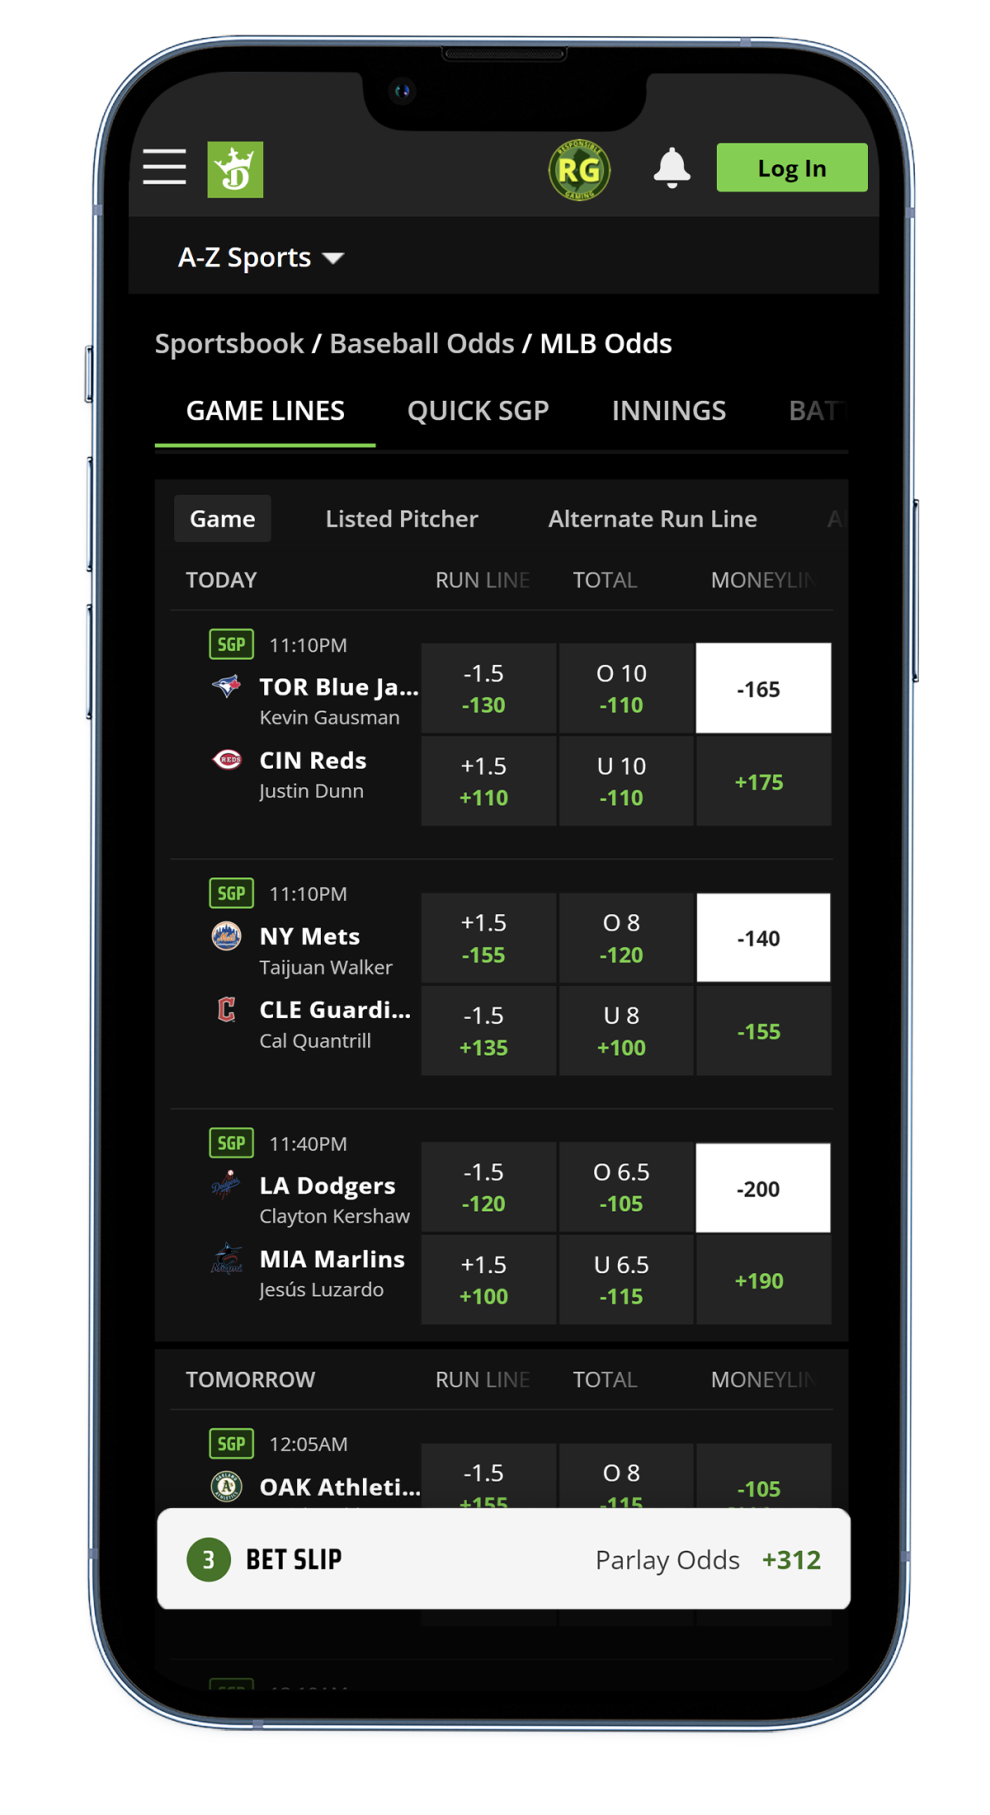 Click on the games you want to add to your MLB parlay bet